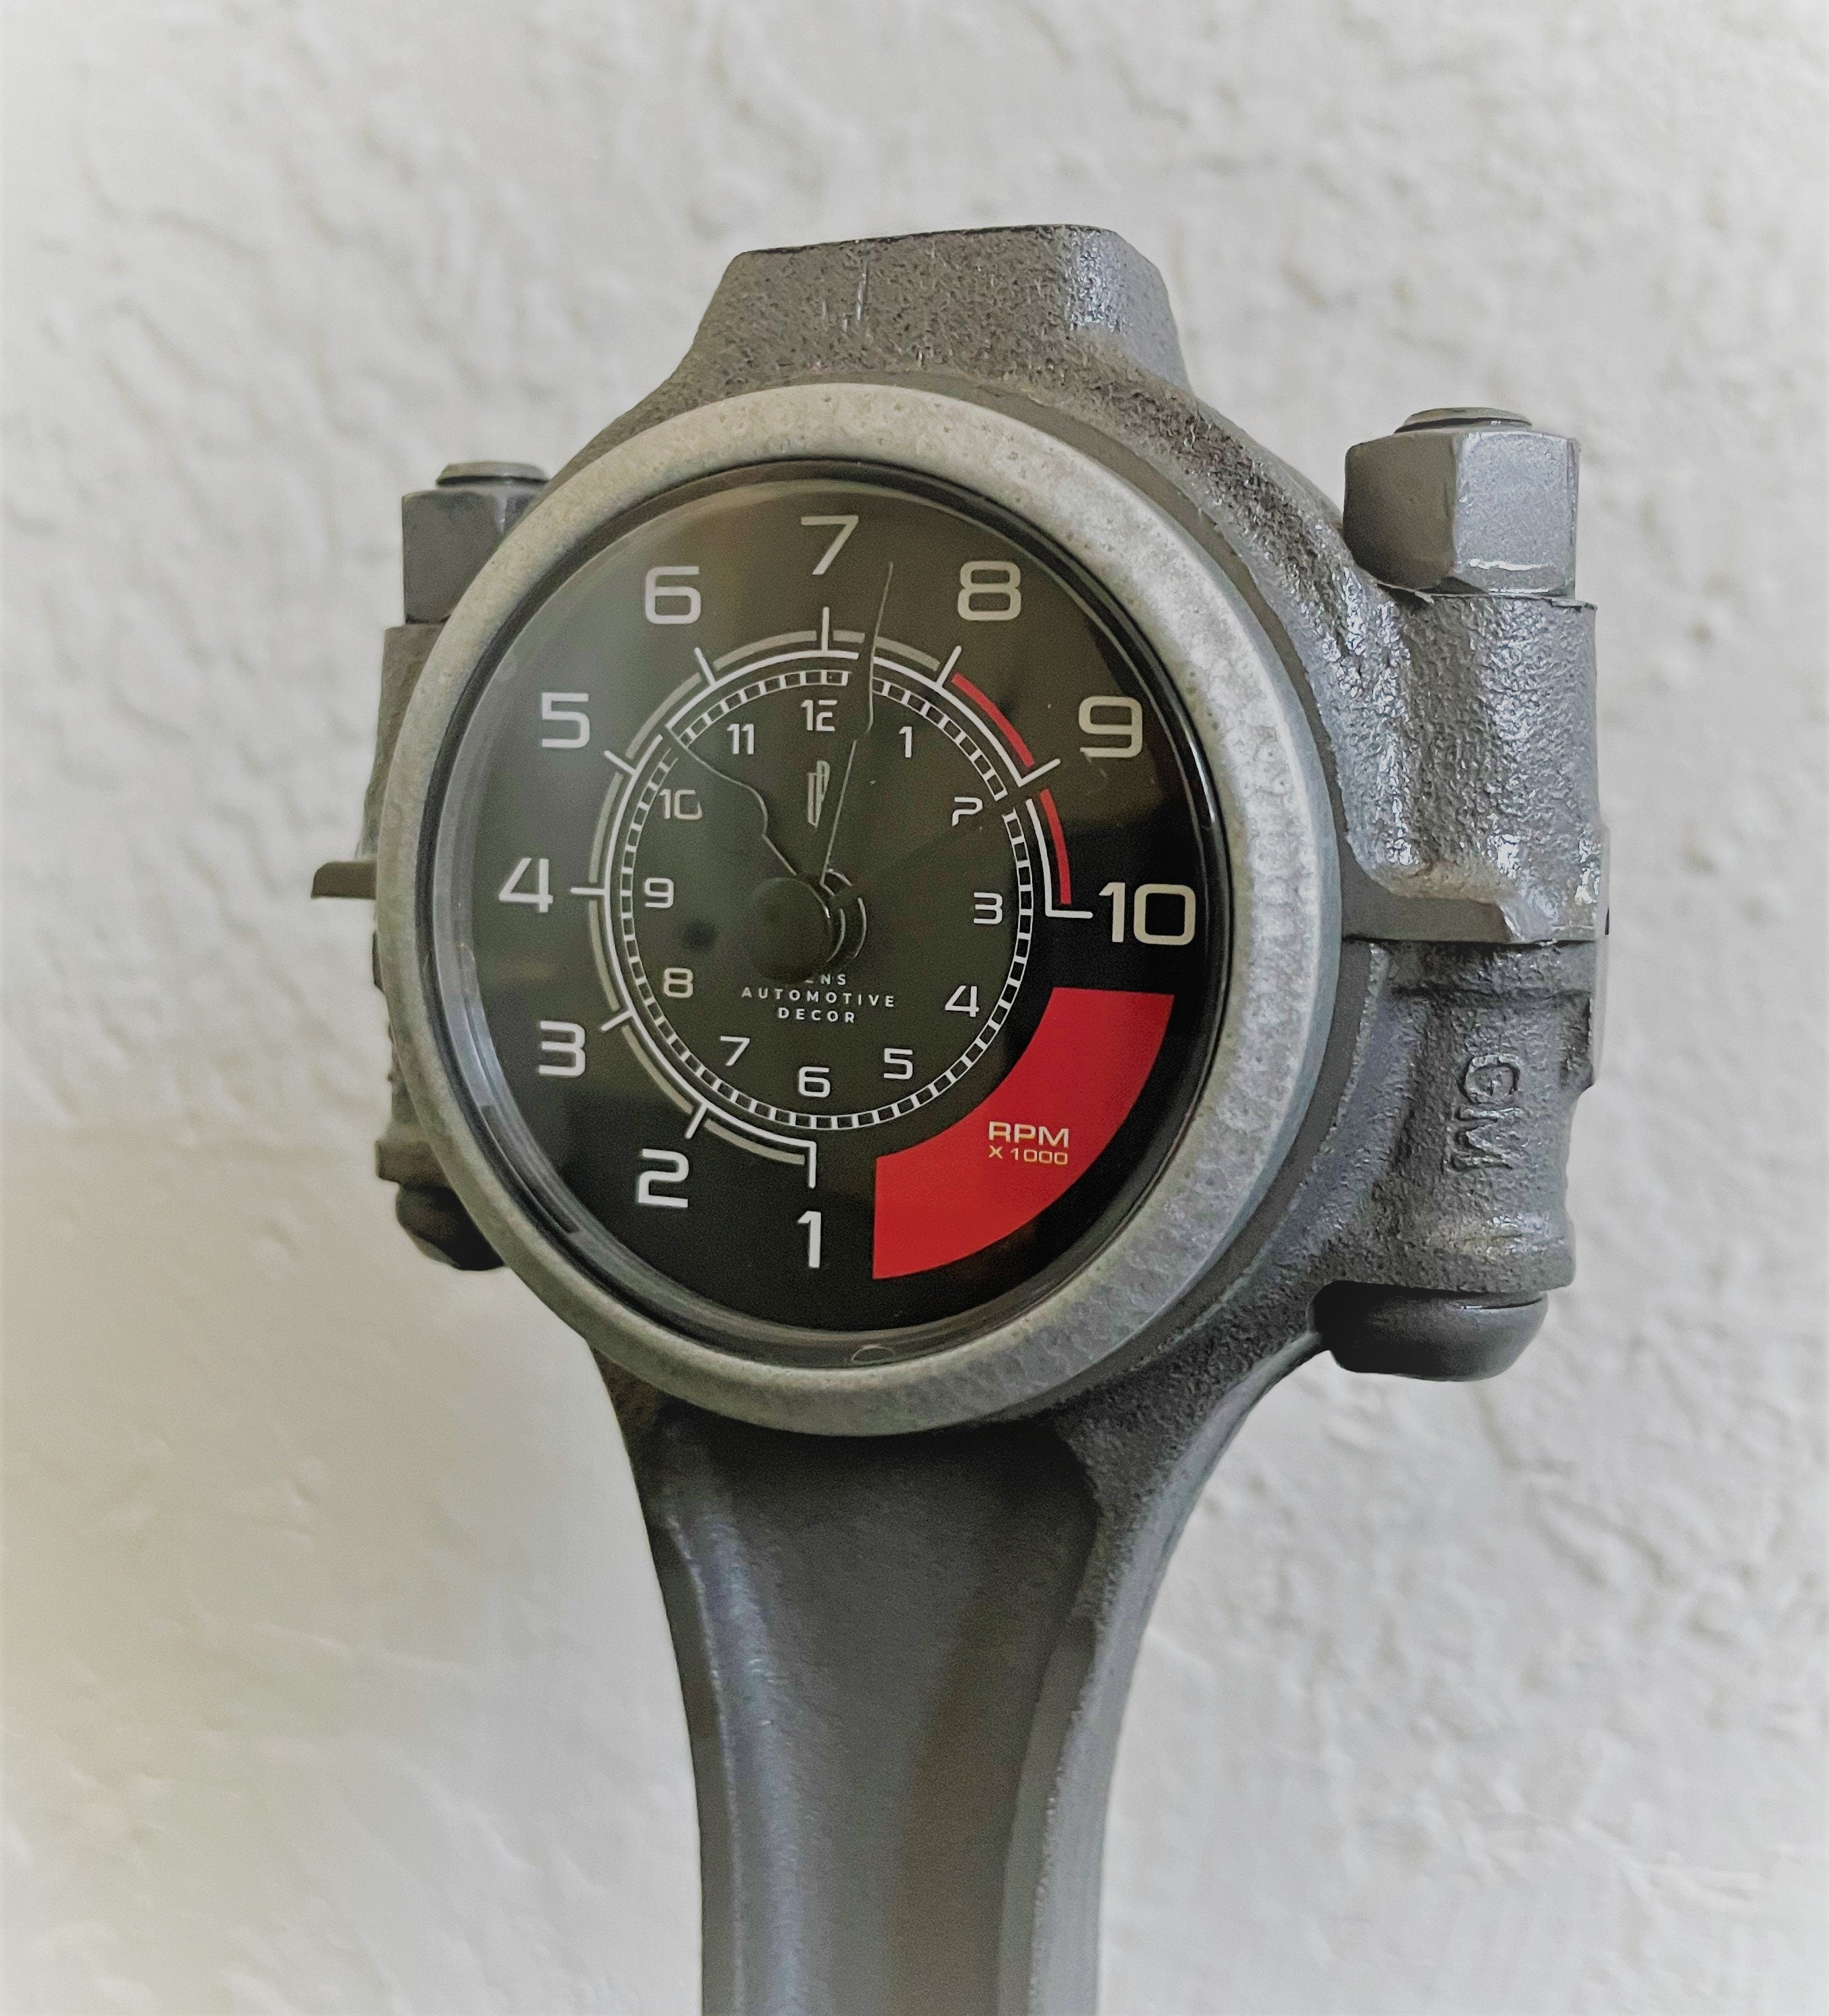 Close-up view of a car piston clock finished in gunmetal gray with a silver clock ring and custom black and red RPM clock face.